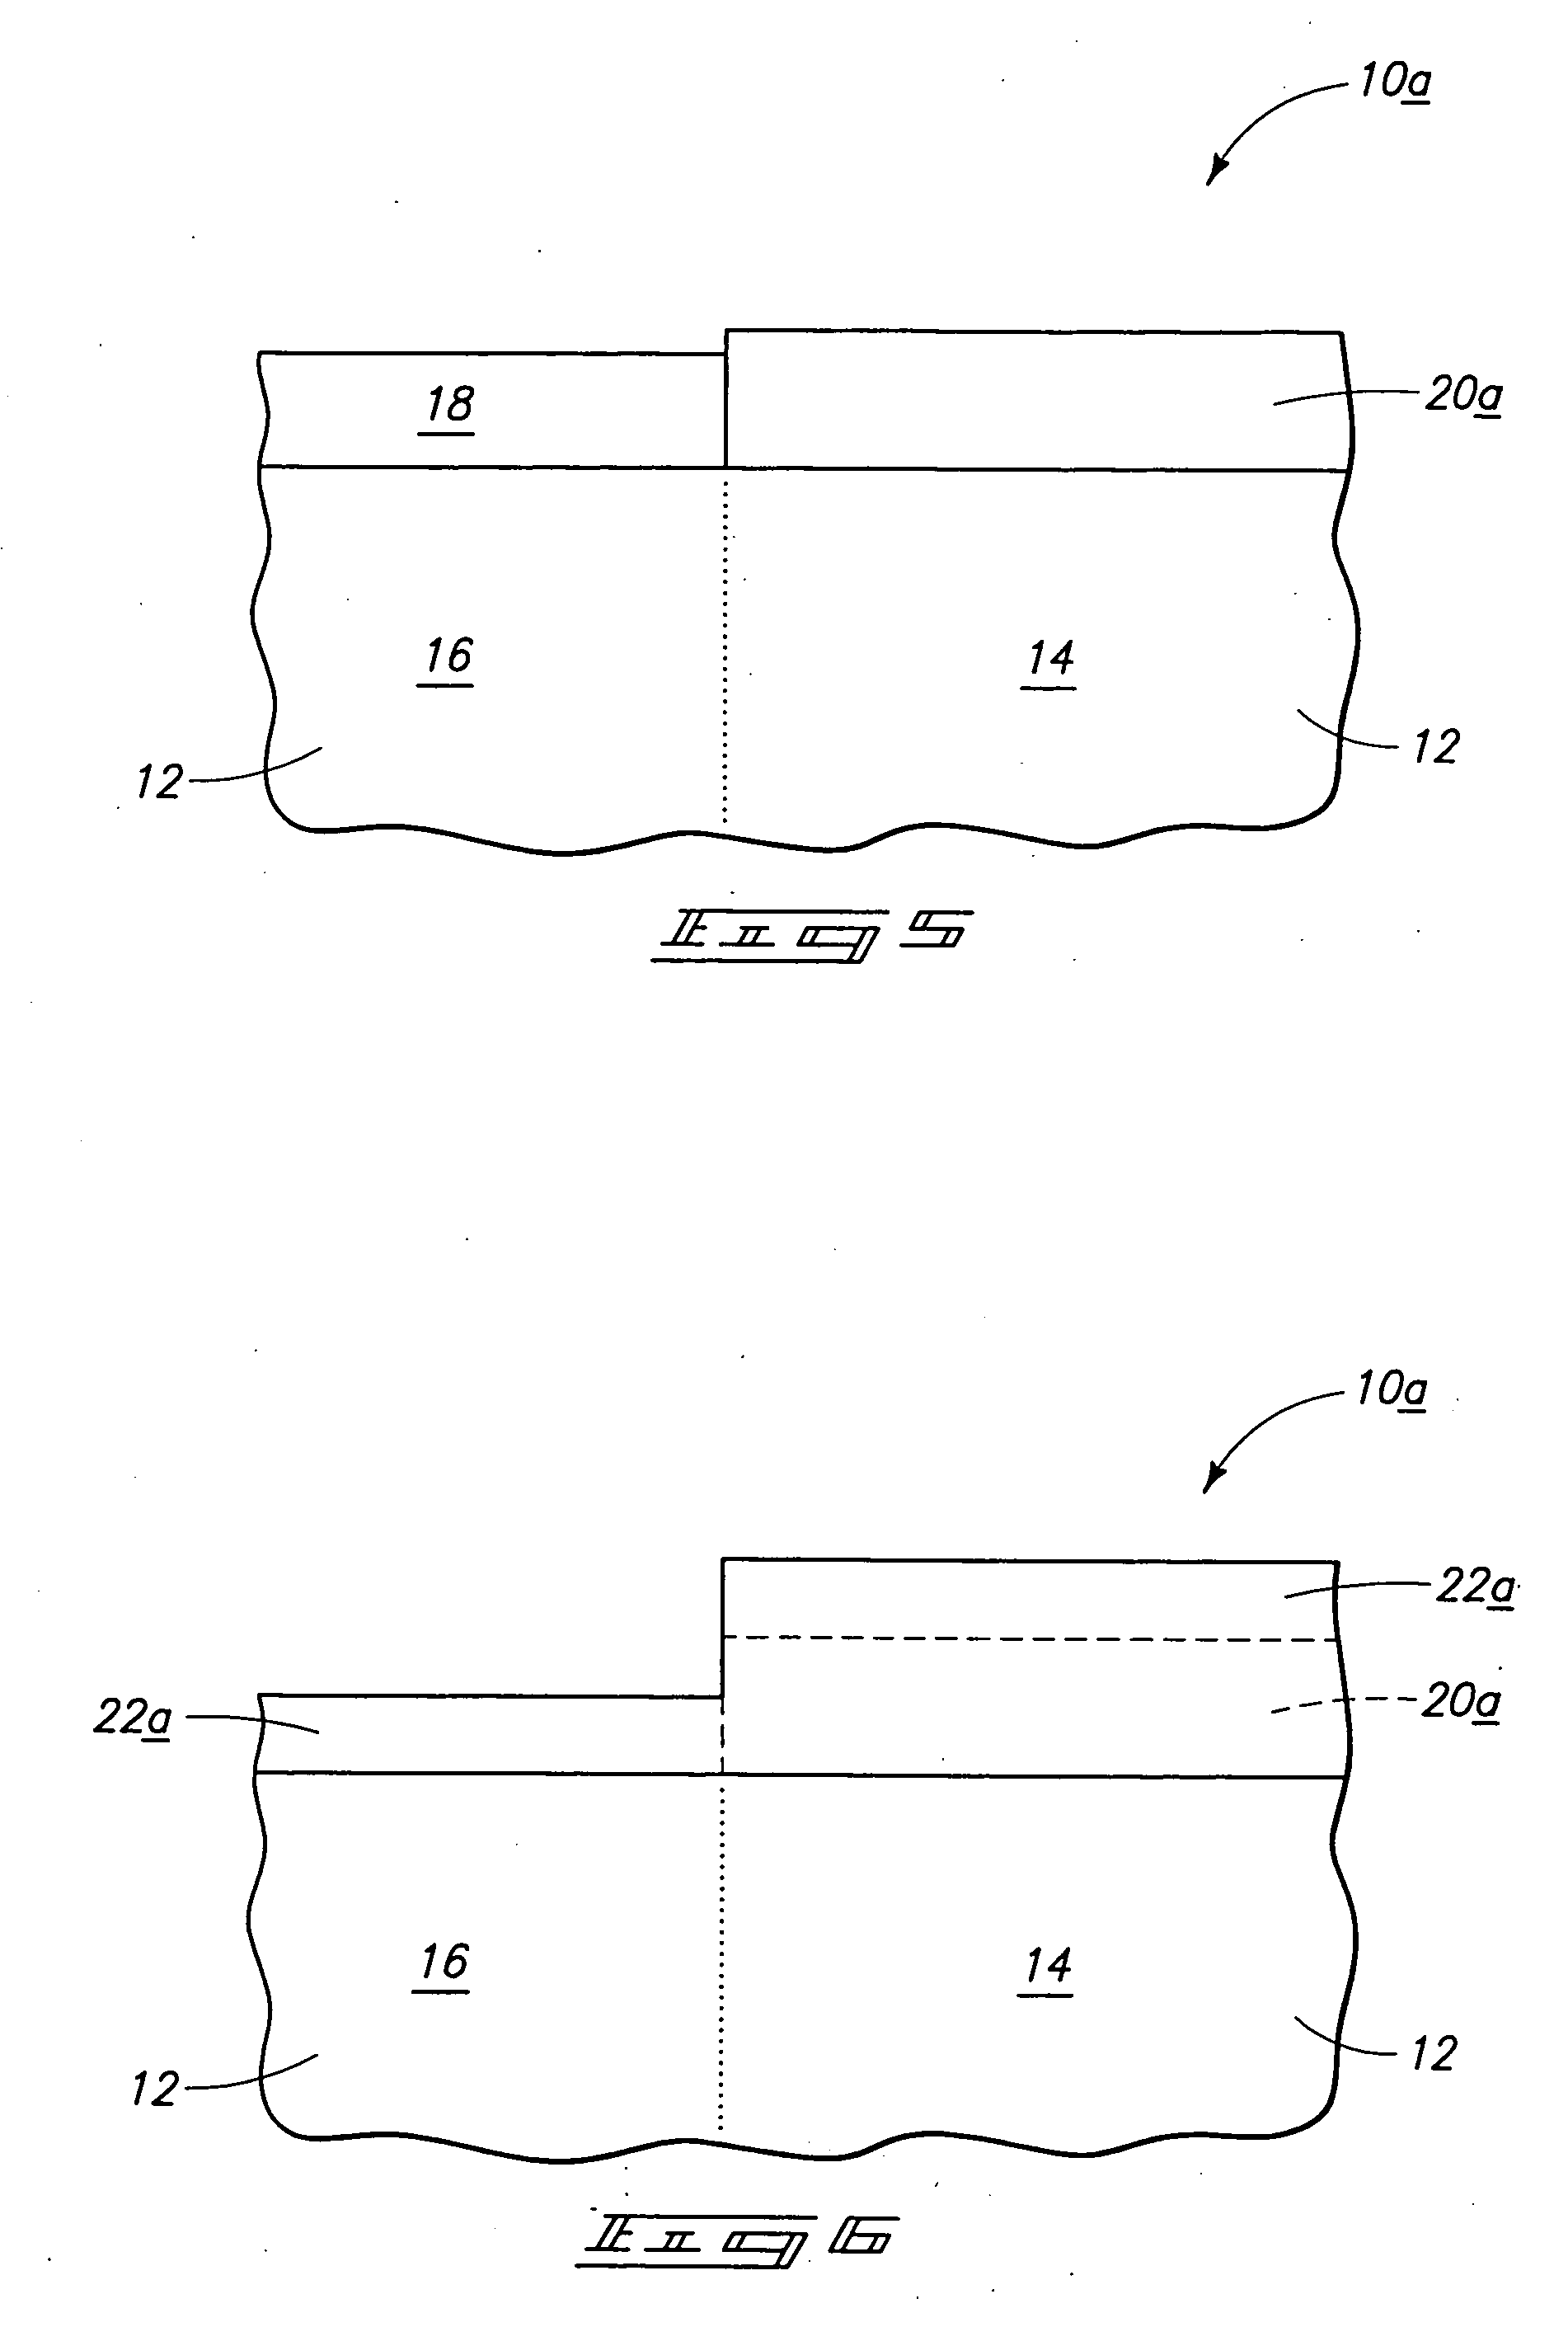 Methods of forming a layer comprising epitaxial silicon, and methods of forming field effect transistors